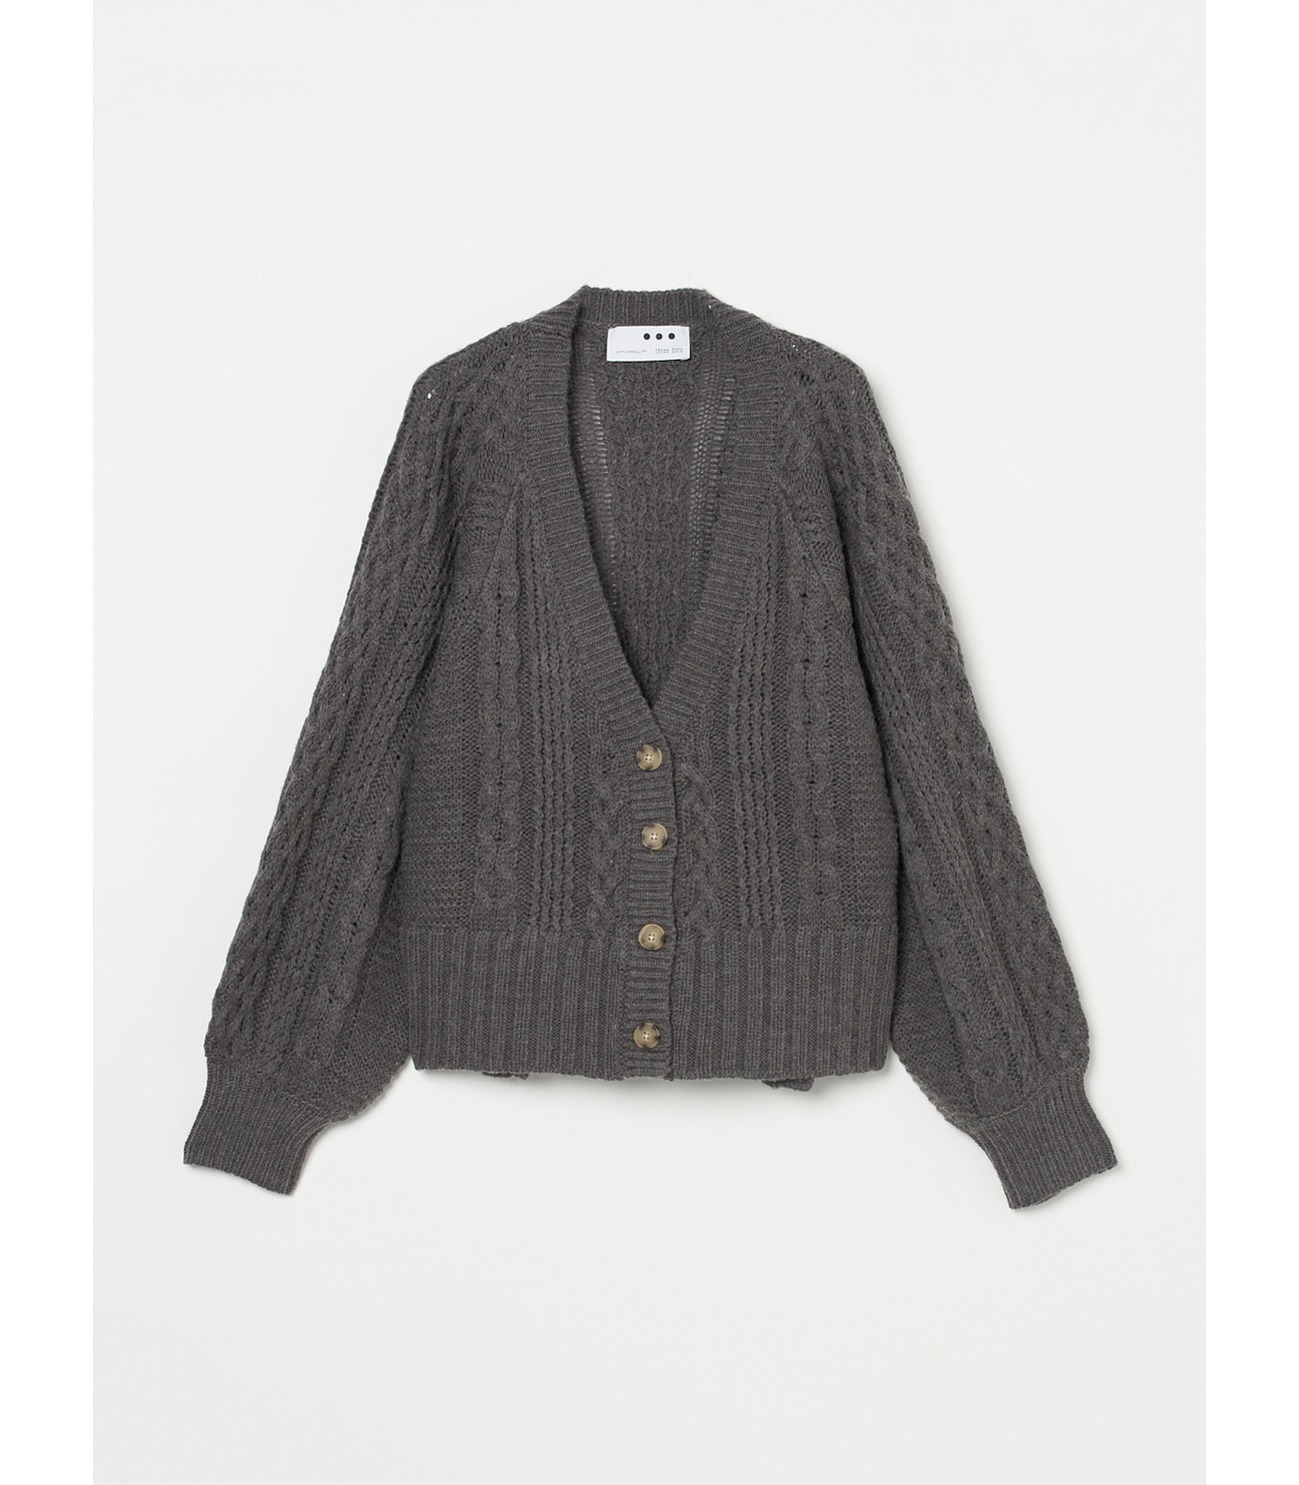 Bulky sweater l/s cable cardy 詳細画像 charcoal 2